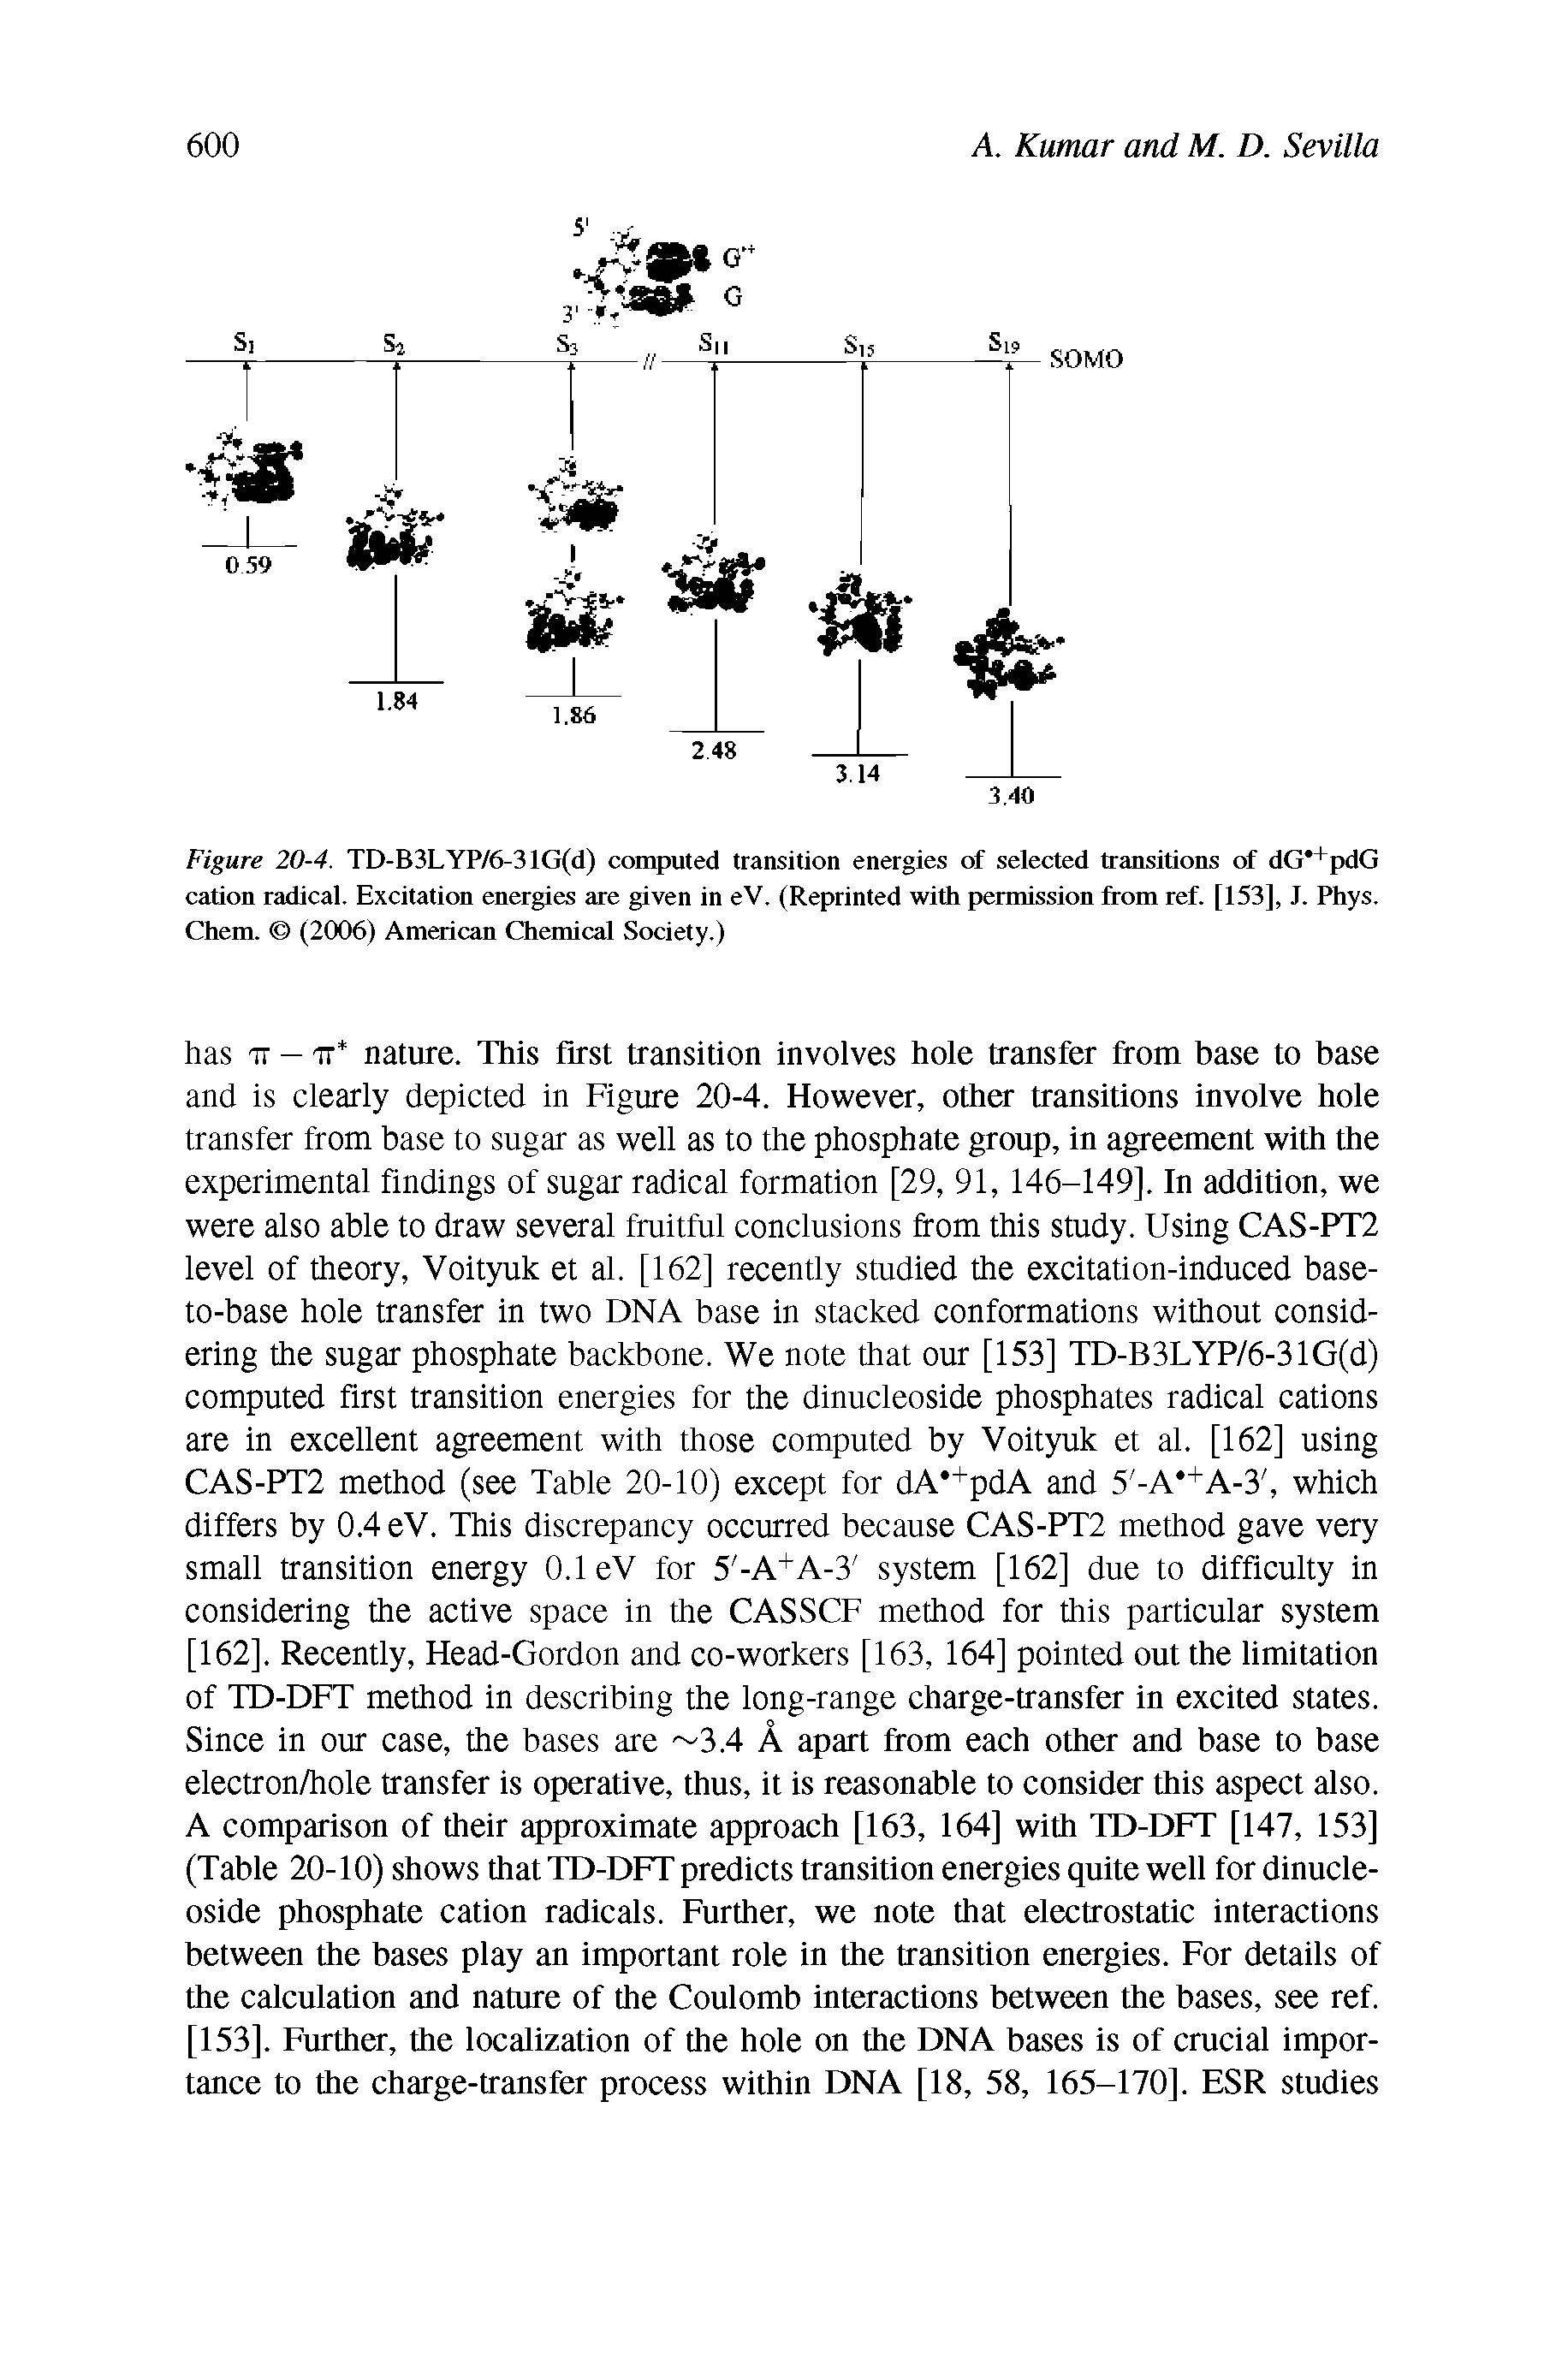 Figure 20-4. TD-B3LYP/6-3 lG(d) computed transition energies of selected transitions of dG +pdG cation radical. Excitation energies are given in eV. (Reprinted with permission from ref. [153], J. Phys. Chem. (2006) American Chemical Society.)...